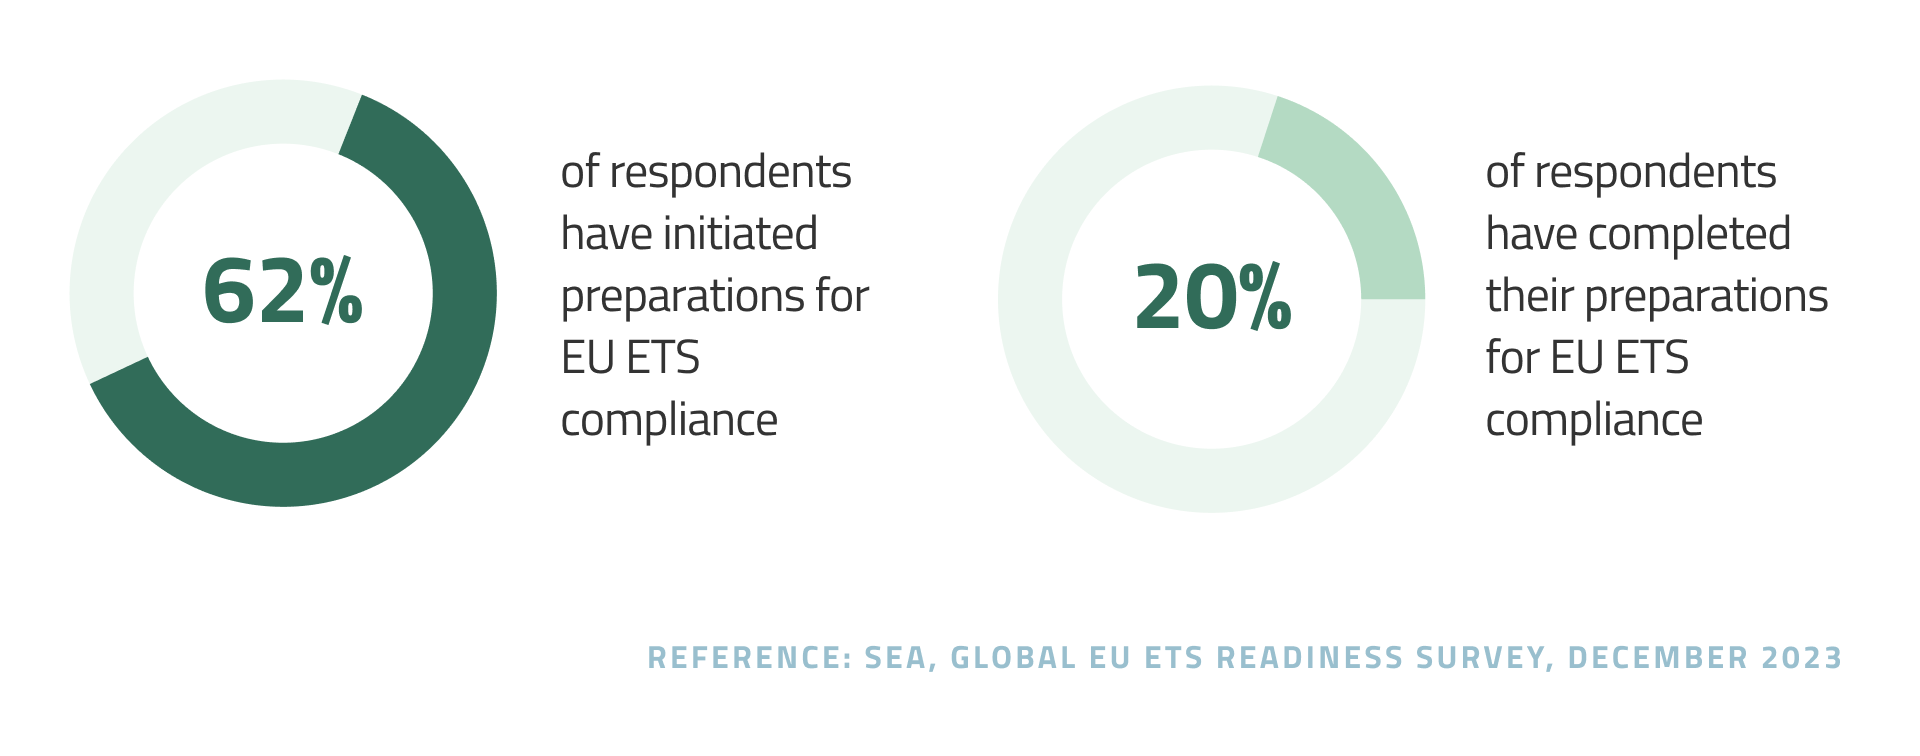 Preparations for the EU ETS compliance